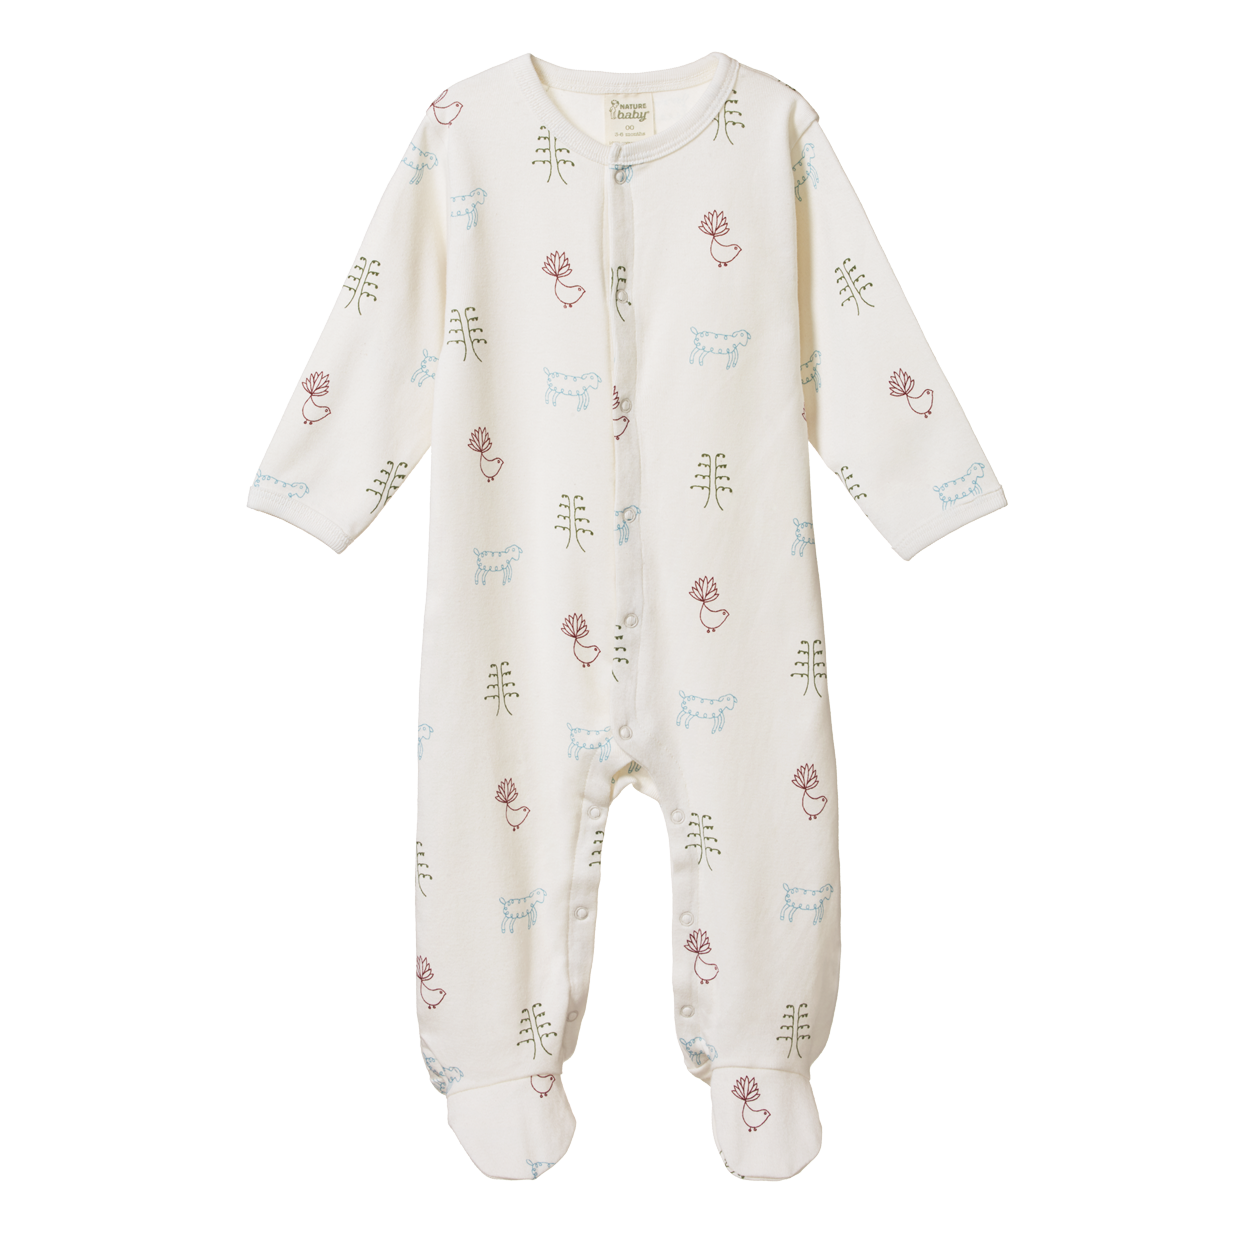 Cotton stretch & grow - nature baby print